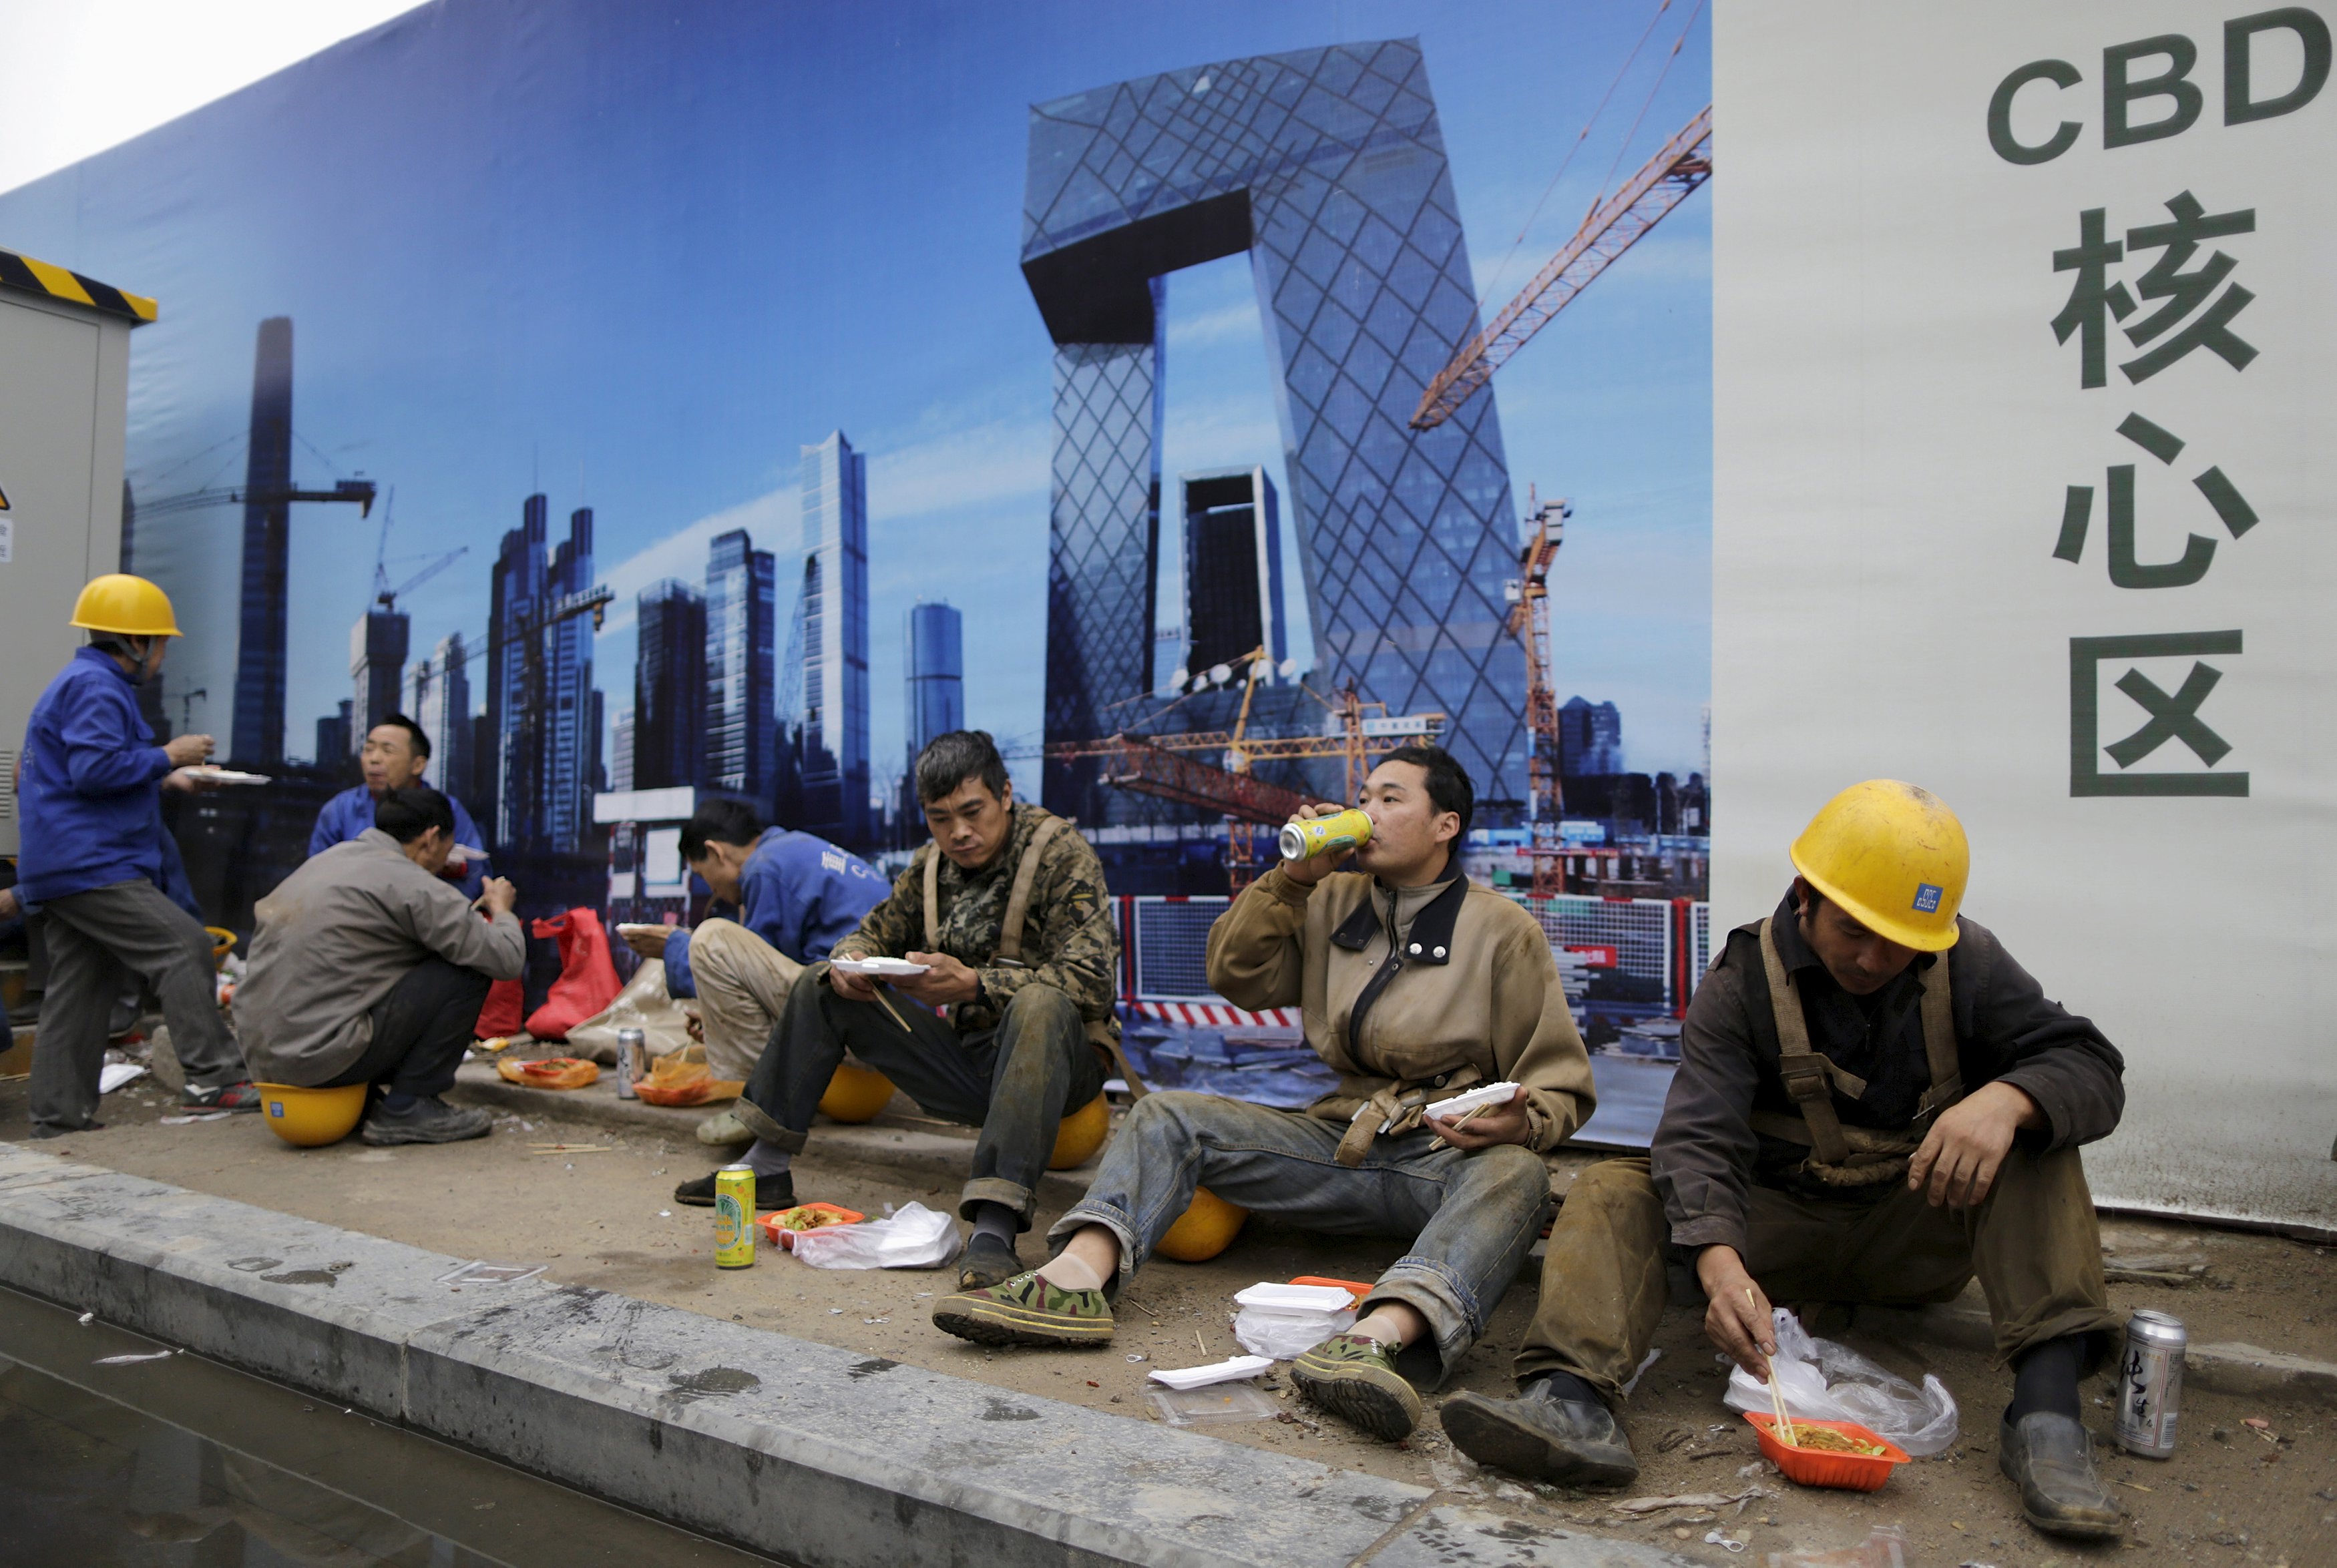 Construction workers have lunch as they sit in front of a poster bearing a picture of the Central Business District (CBD) area, outside a construction site in Beijing, China, October 26, 2015. China's ruling Communist Party opened a key meeting on Monday that will focus on financial reforms and how to maintain growth of around seven percent and more broadly map out economic and social targets for the next five years. REUTERS/Jason Lee